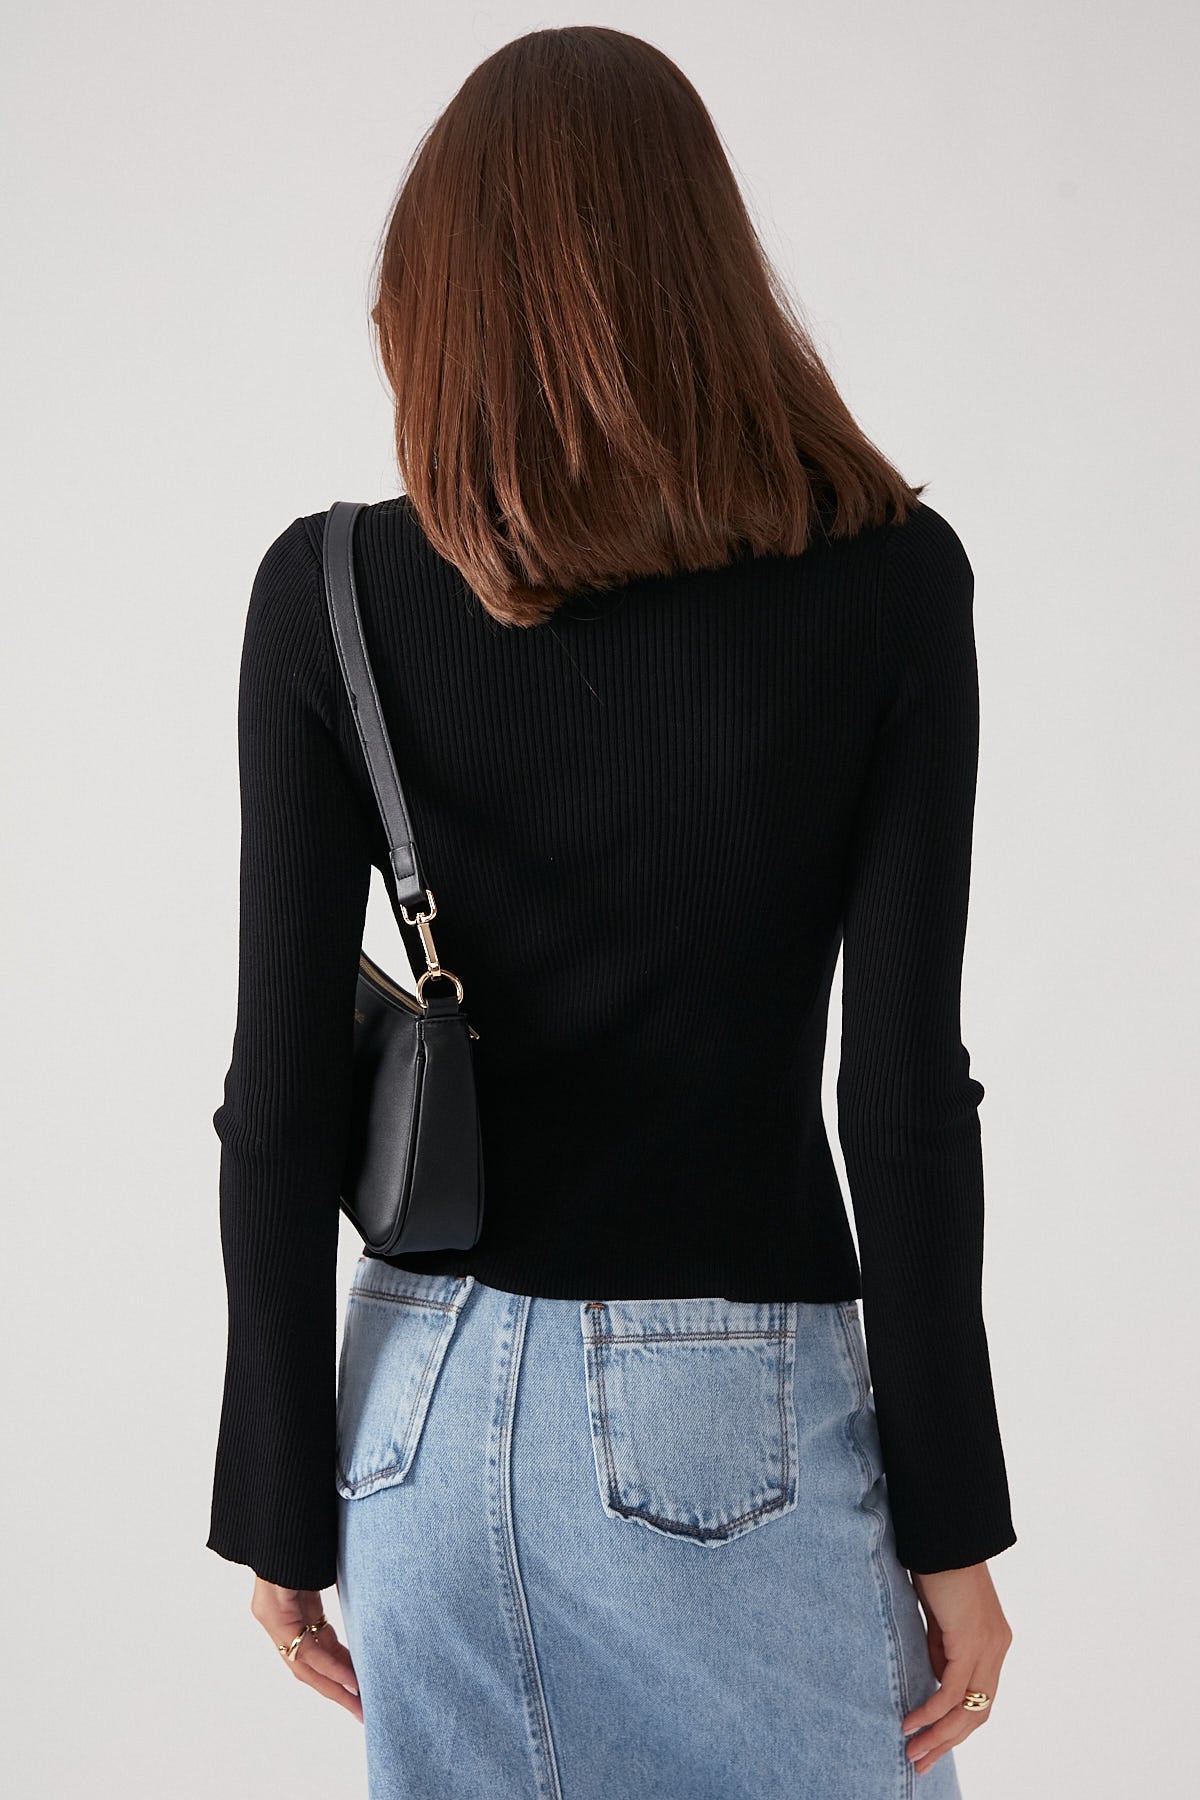 Perfect Stranger Tie Front Knit Top Black